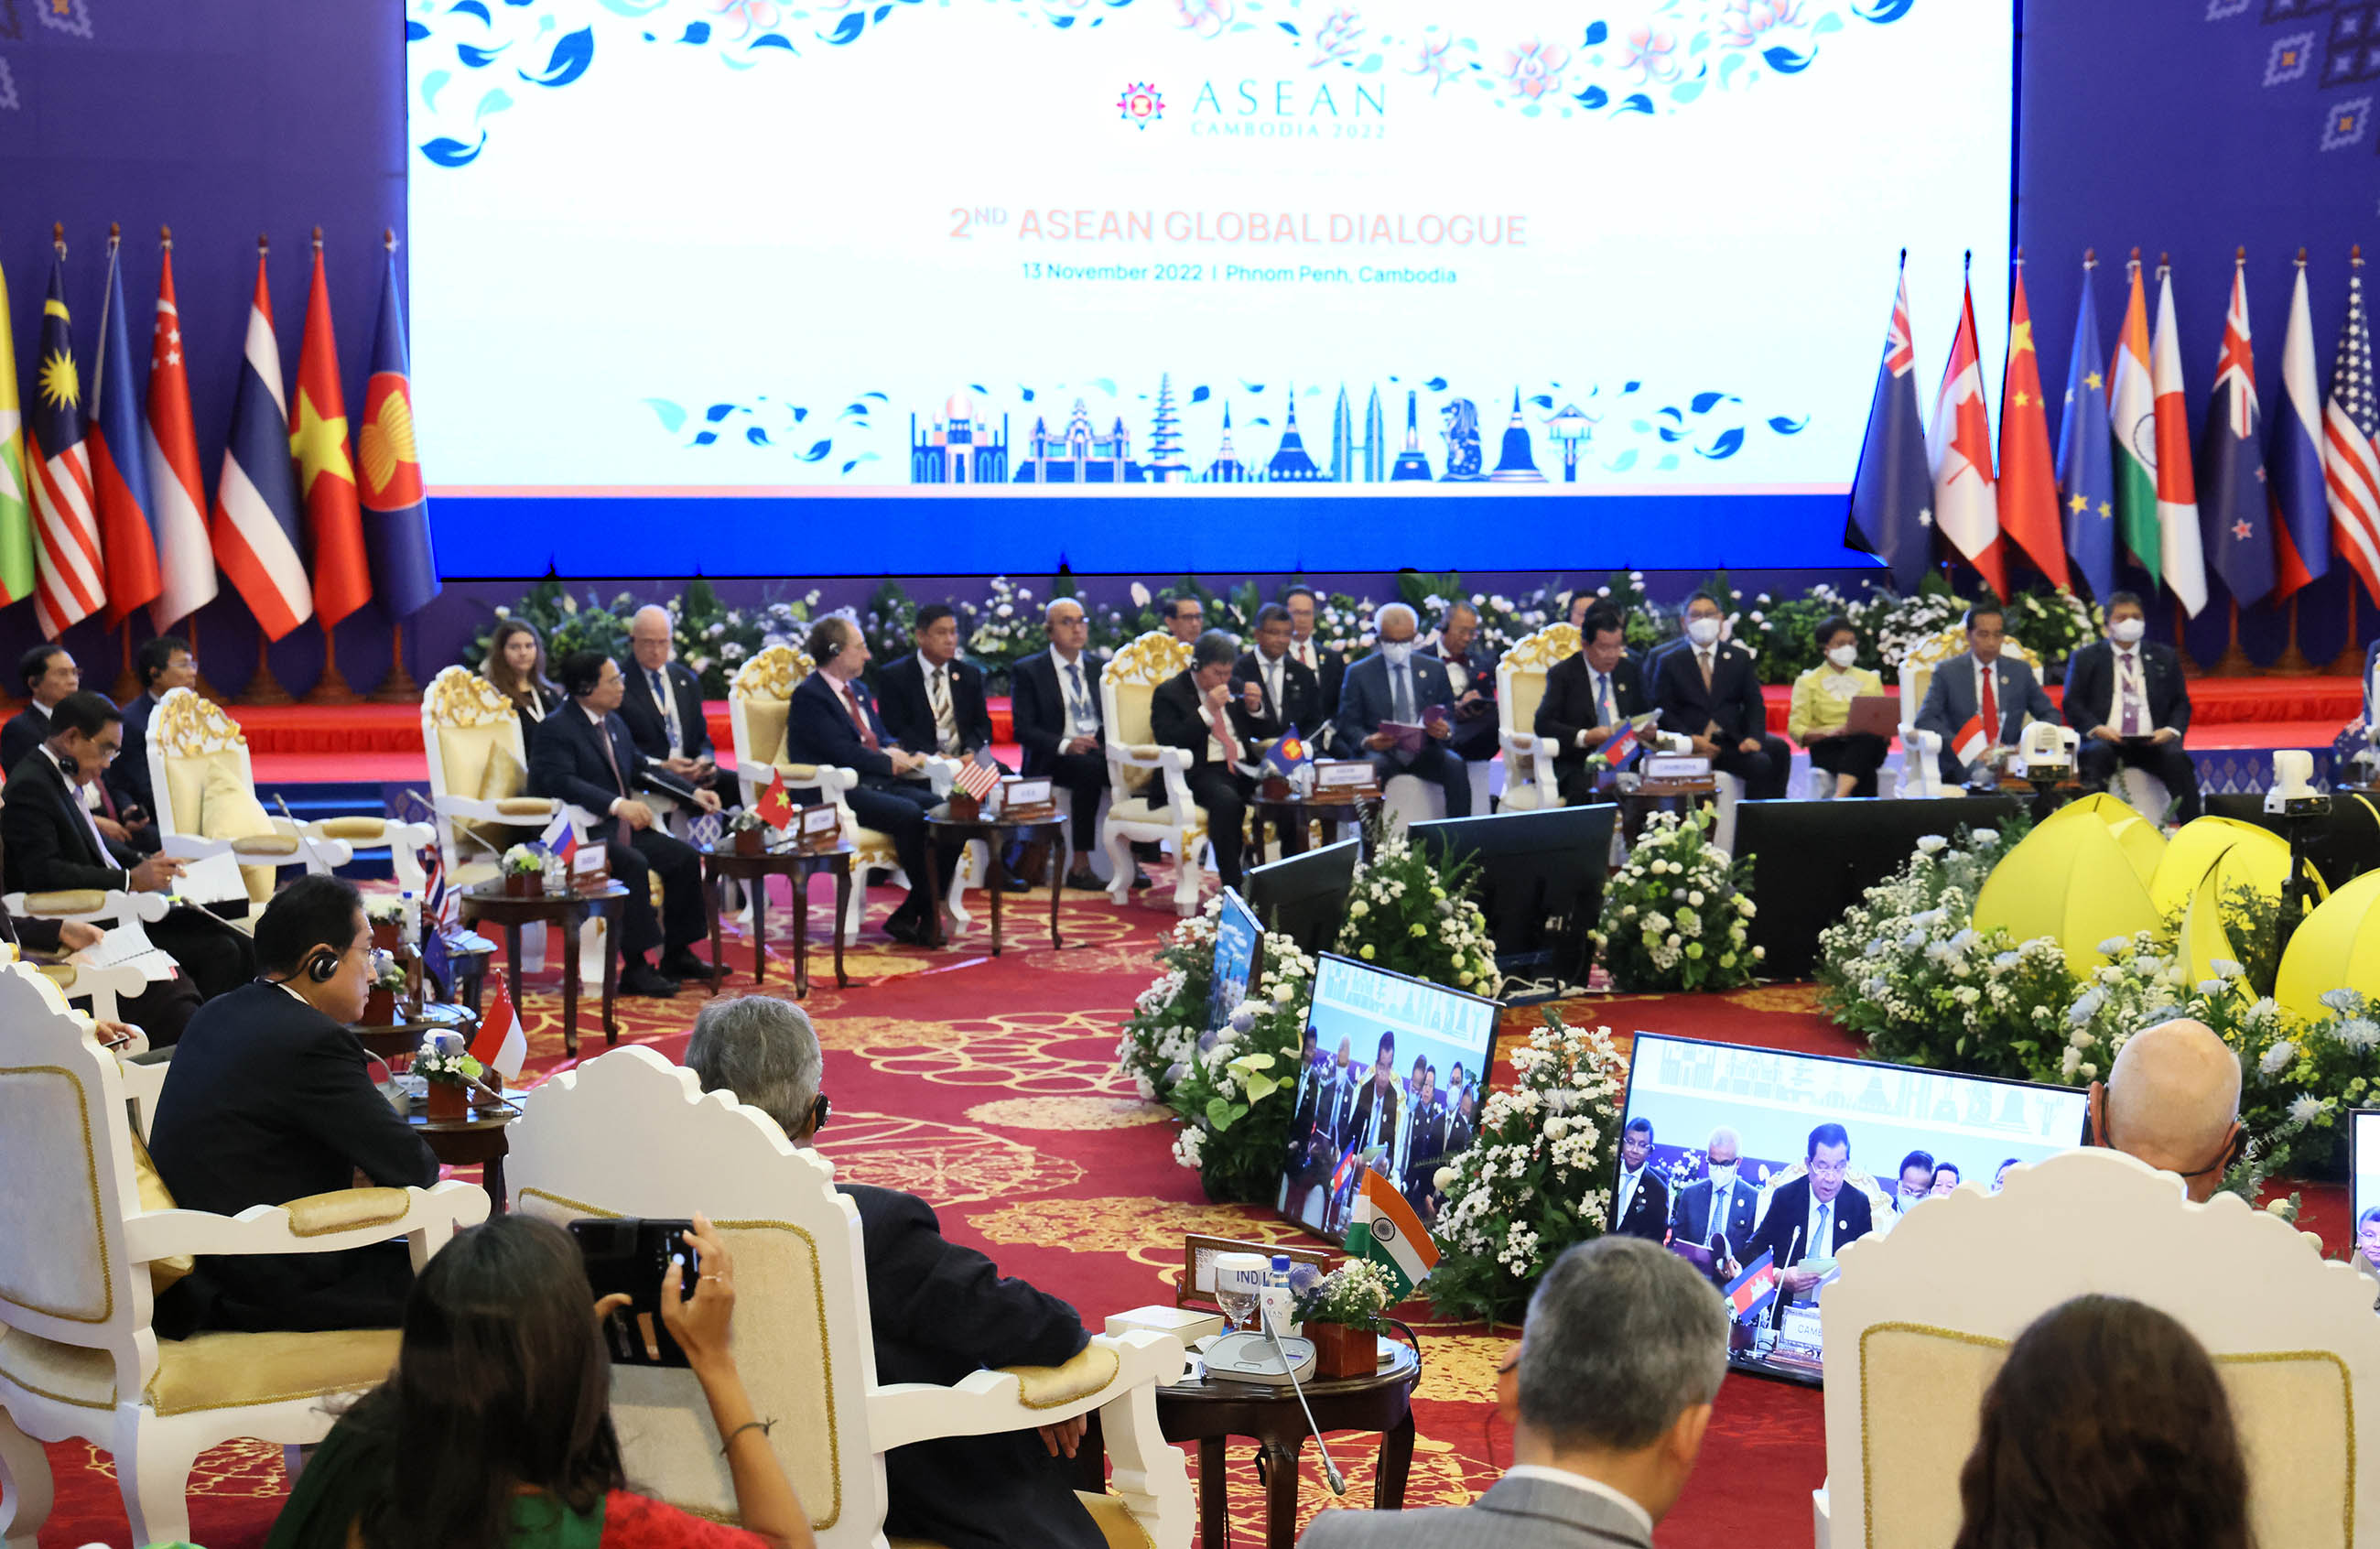 The Second ASEAN Global Dialogue (2)